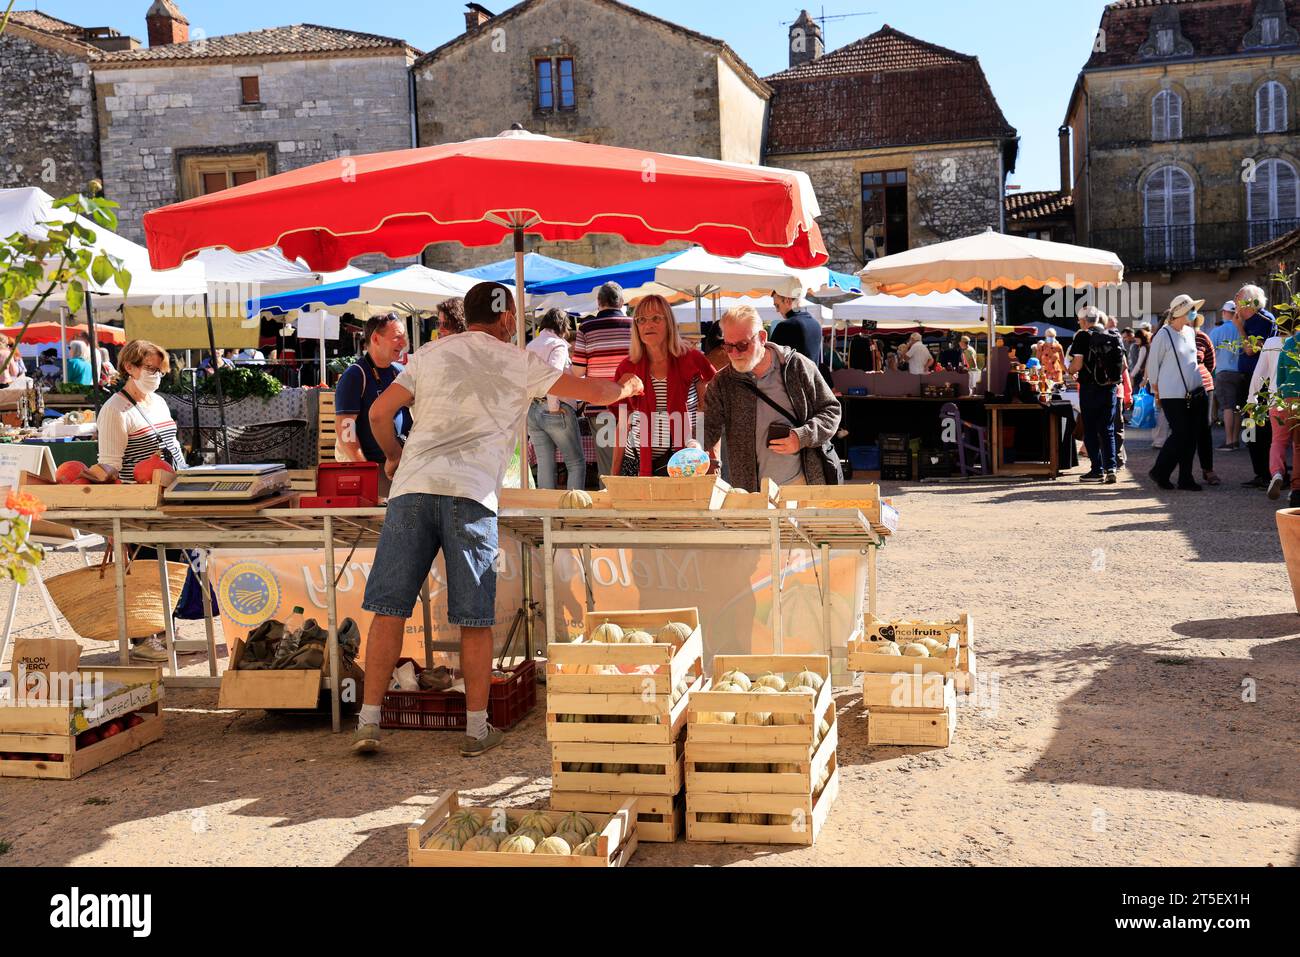 Market in the bastide town of Monpazier. Market day on the Place des Cornières (central square) of the bastide town of Monpazier in Périgord. The hist Stock Photo